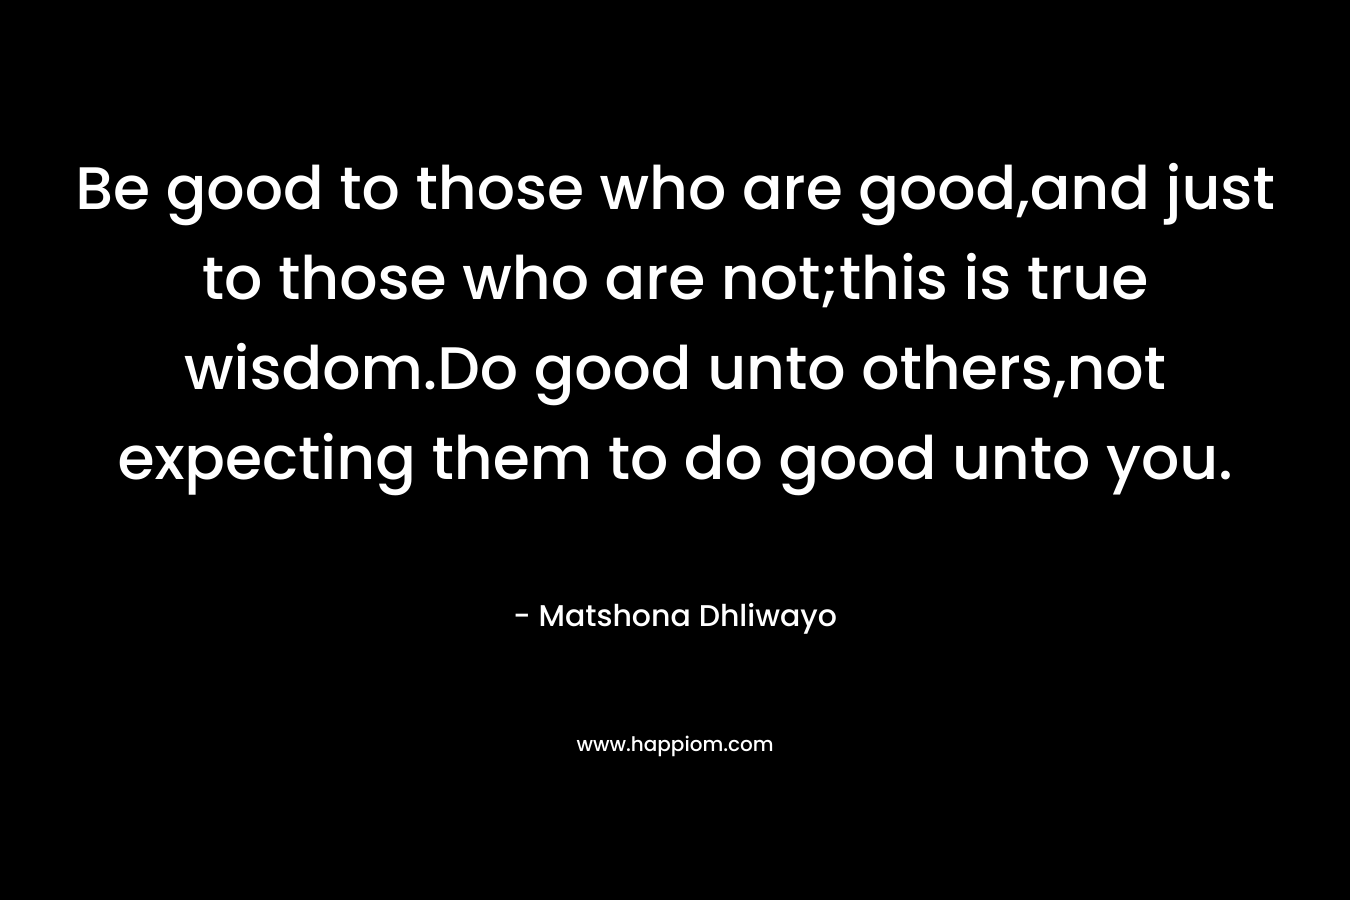 Be good to those who are good,and just to those who are not;this is true wisdom.Do good unto others,not expecting them to do good unto you. – Matshona Dhliwayo